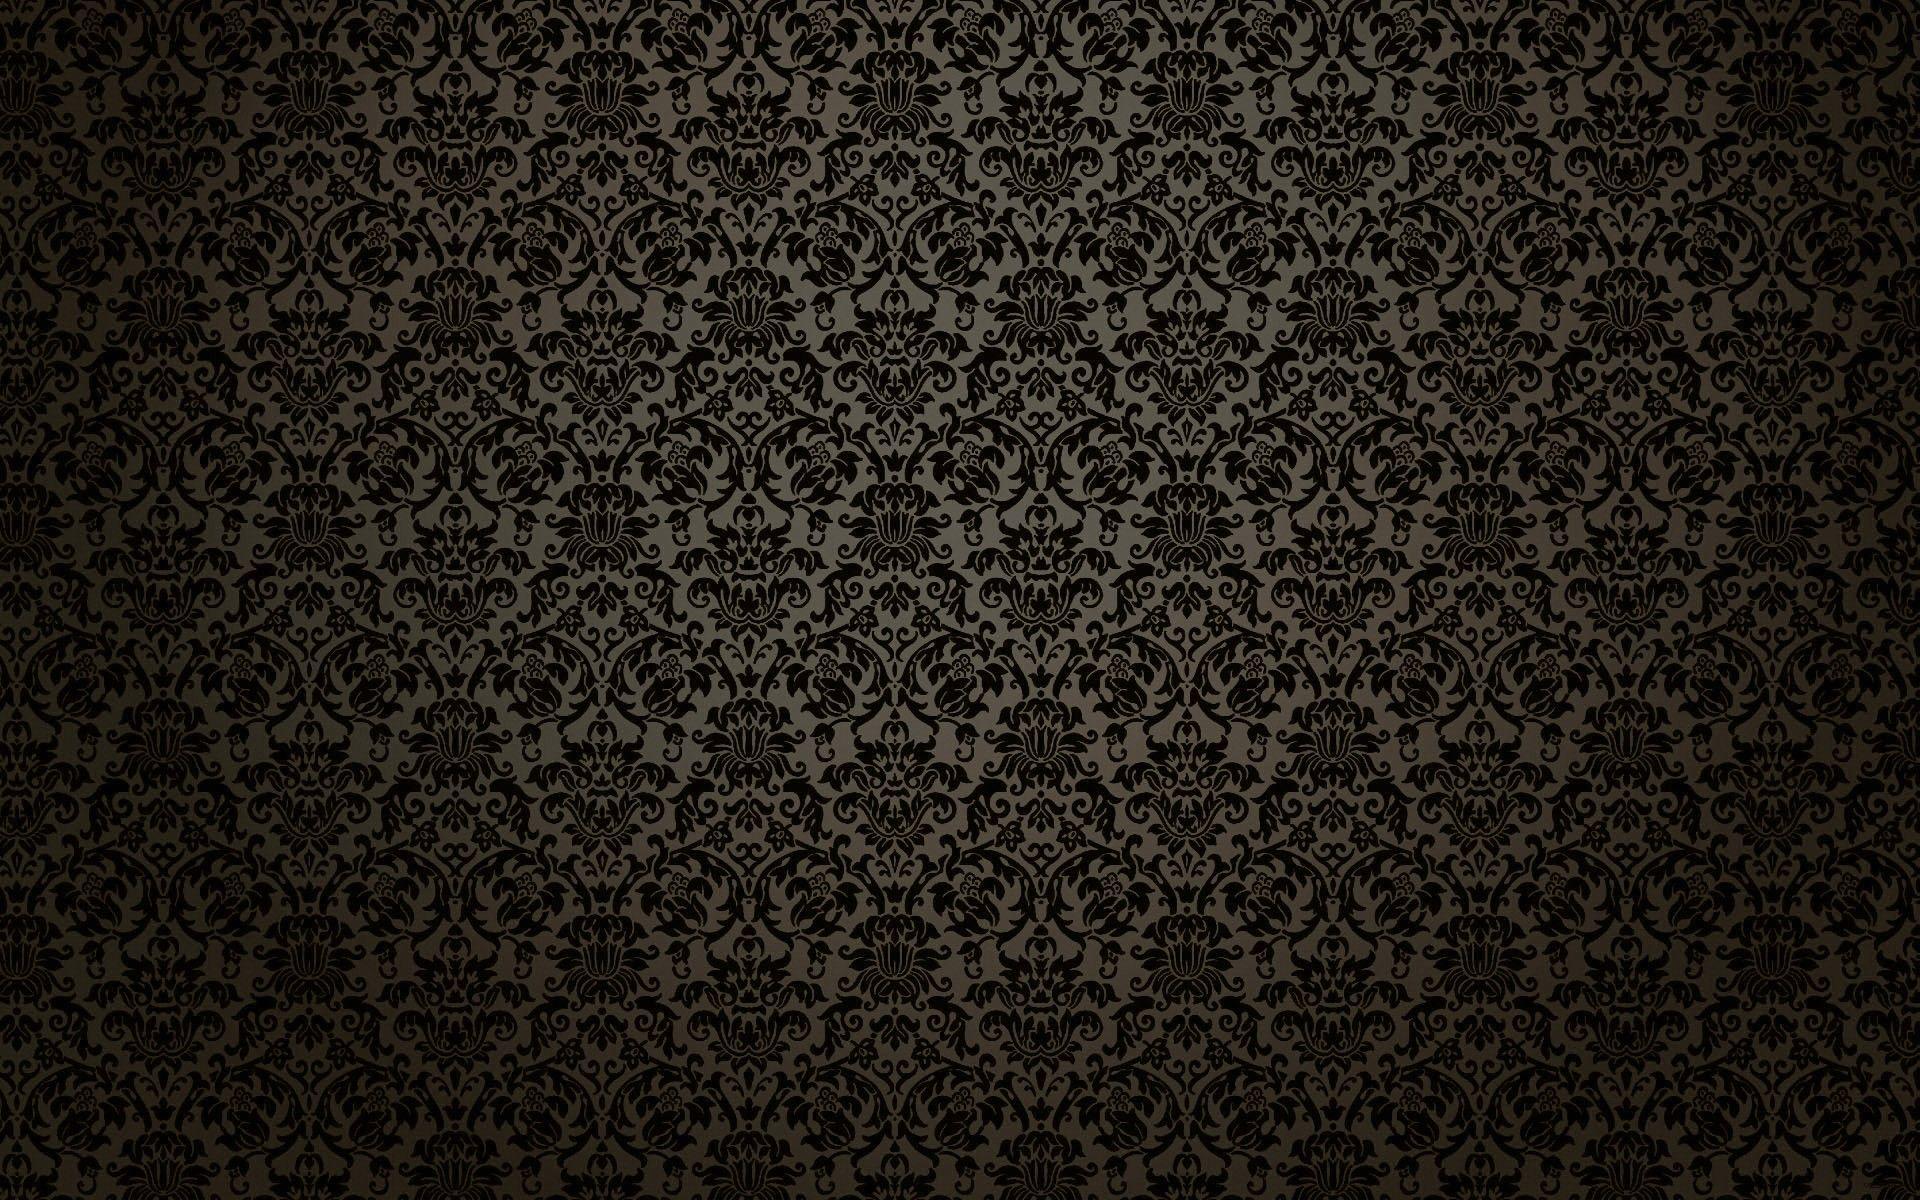 Victorian Wallpaper Images  Free Photos PNG Stickers Wallpapers   Backgrounds  rawpixel